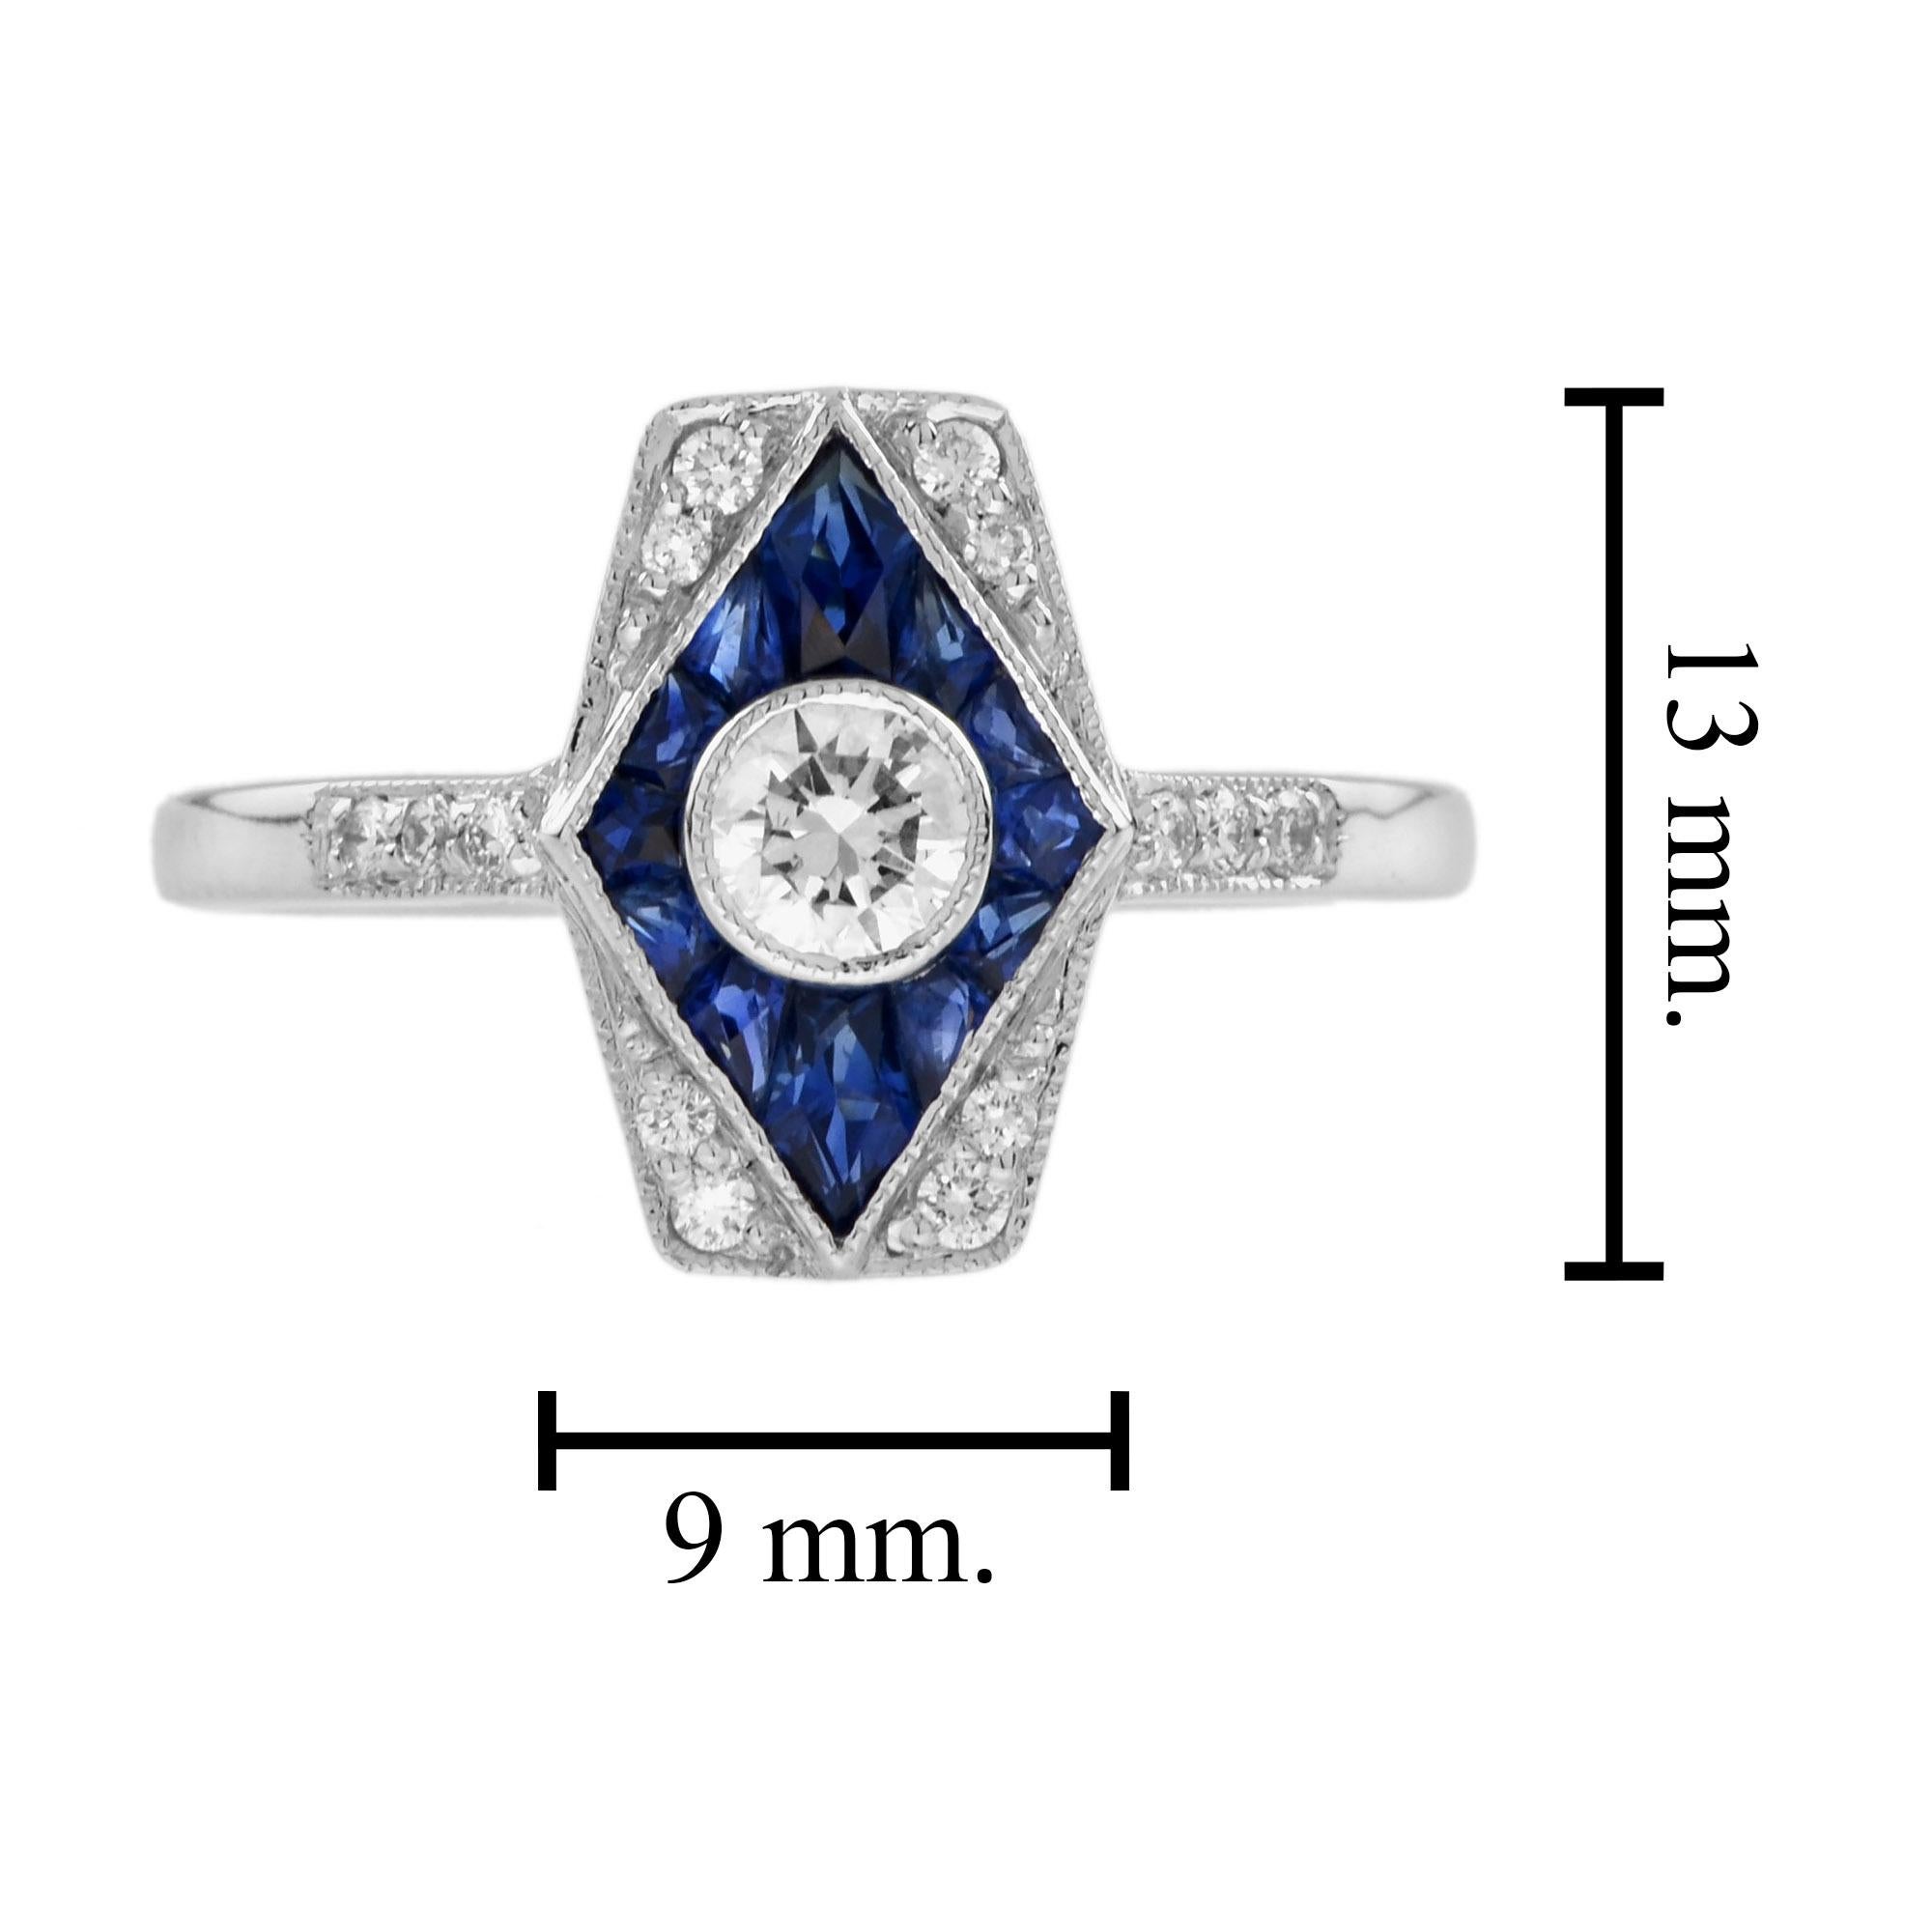 For Sale:  Diamond and Sapphire Art Deco Style Rhombus Engagement Ring in 18K White Gold  7